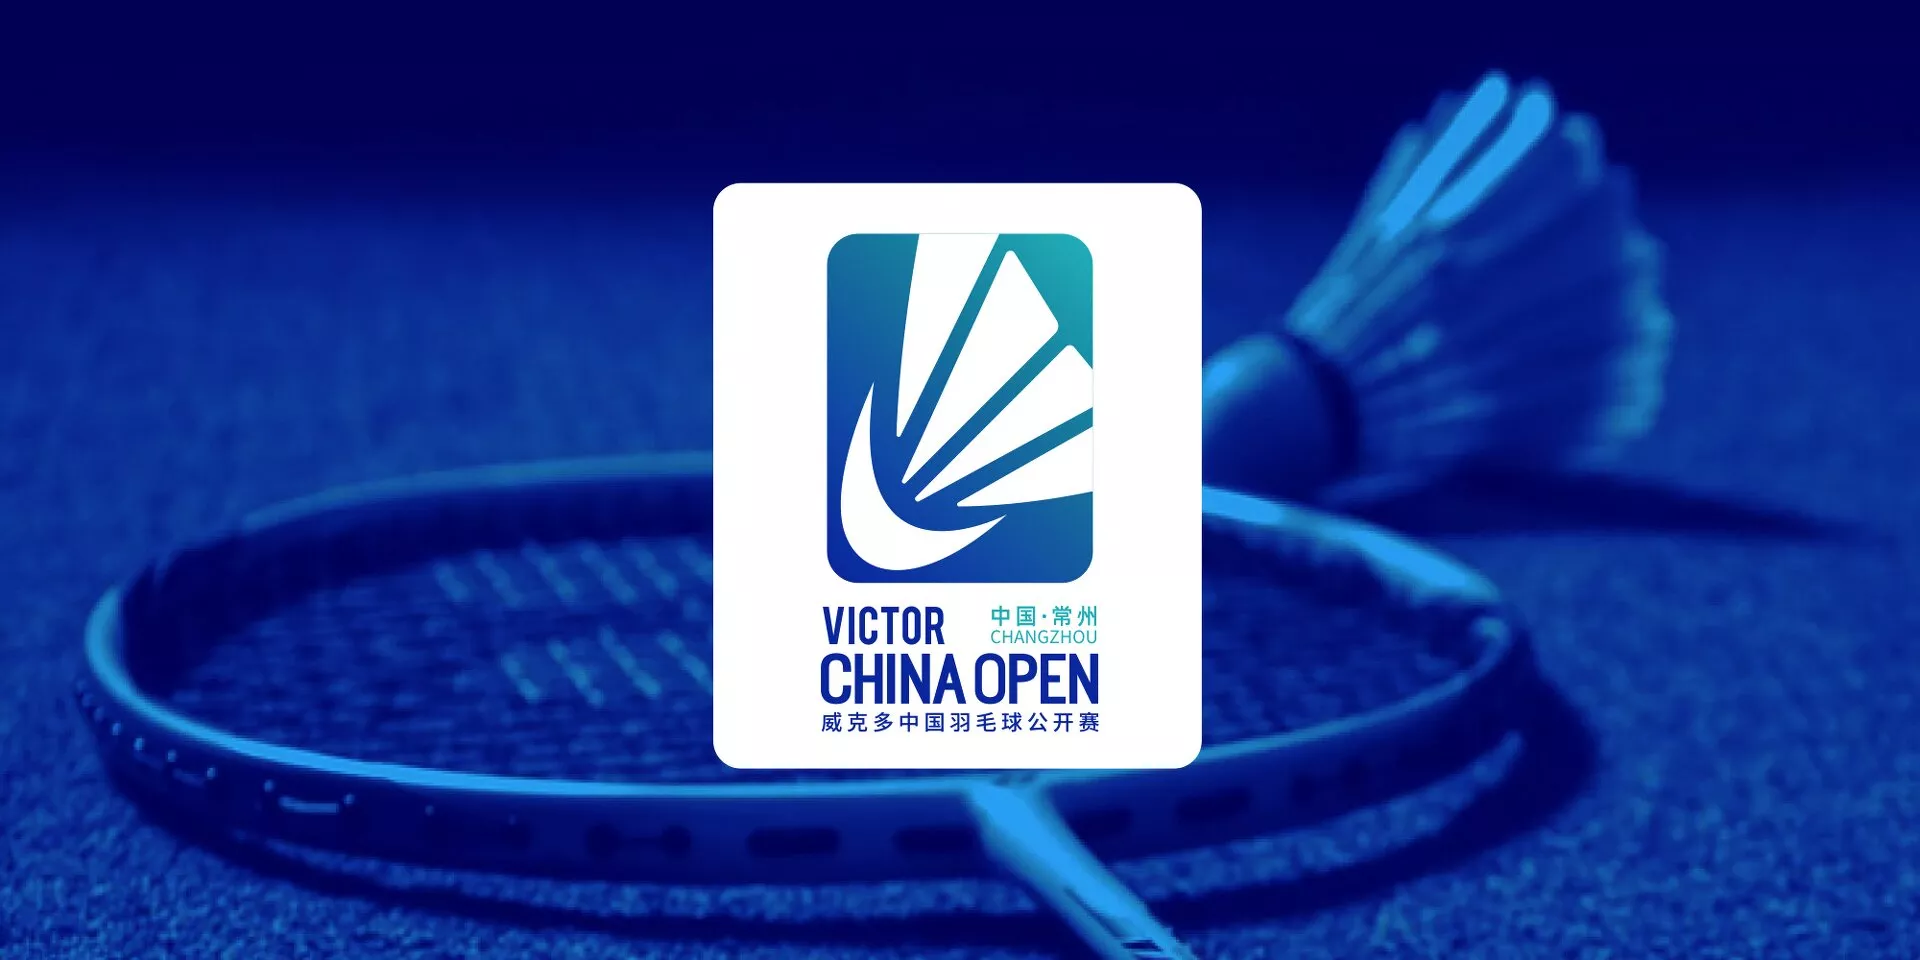 Where and how to watch China Open 2023 live in Malaysia?